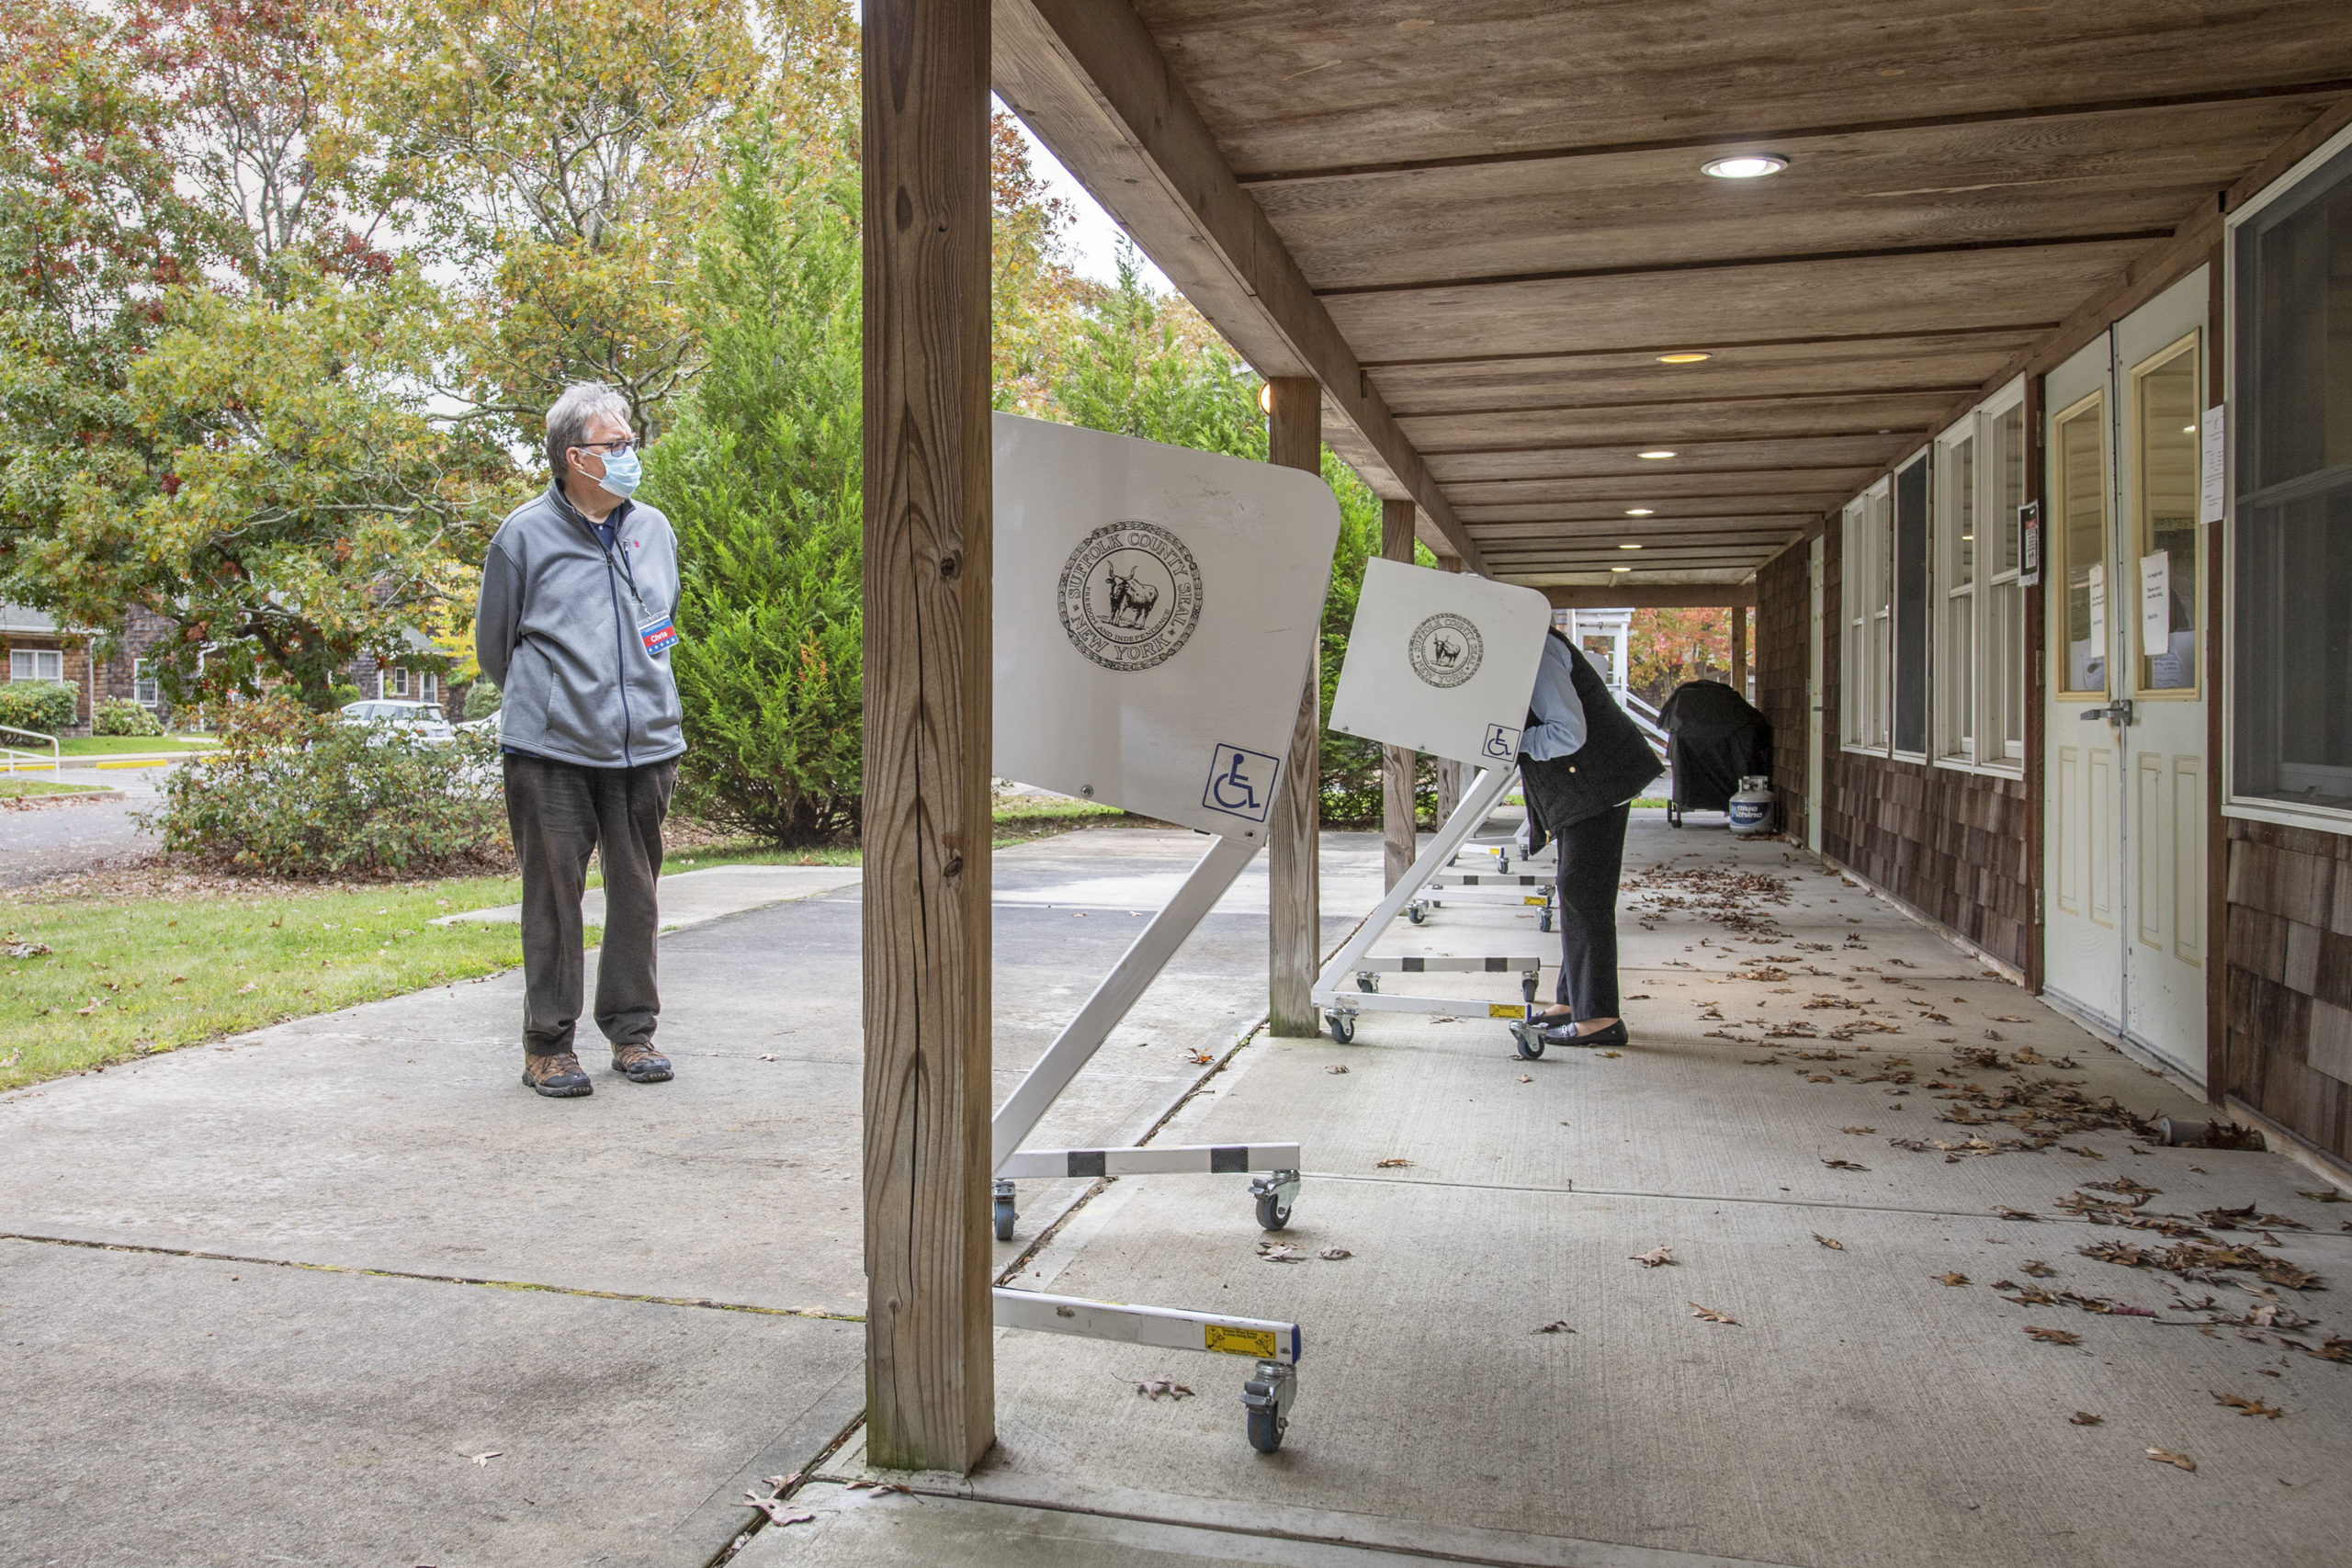 A polling inspector keeps a watchful eye as voters cast their ballots as part of Early Voting in East Hampton Town at the Windmill Village complex on Accabonac Road on Monday morning.   MICHAEL HELLER